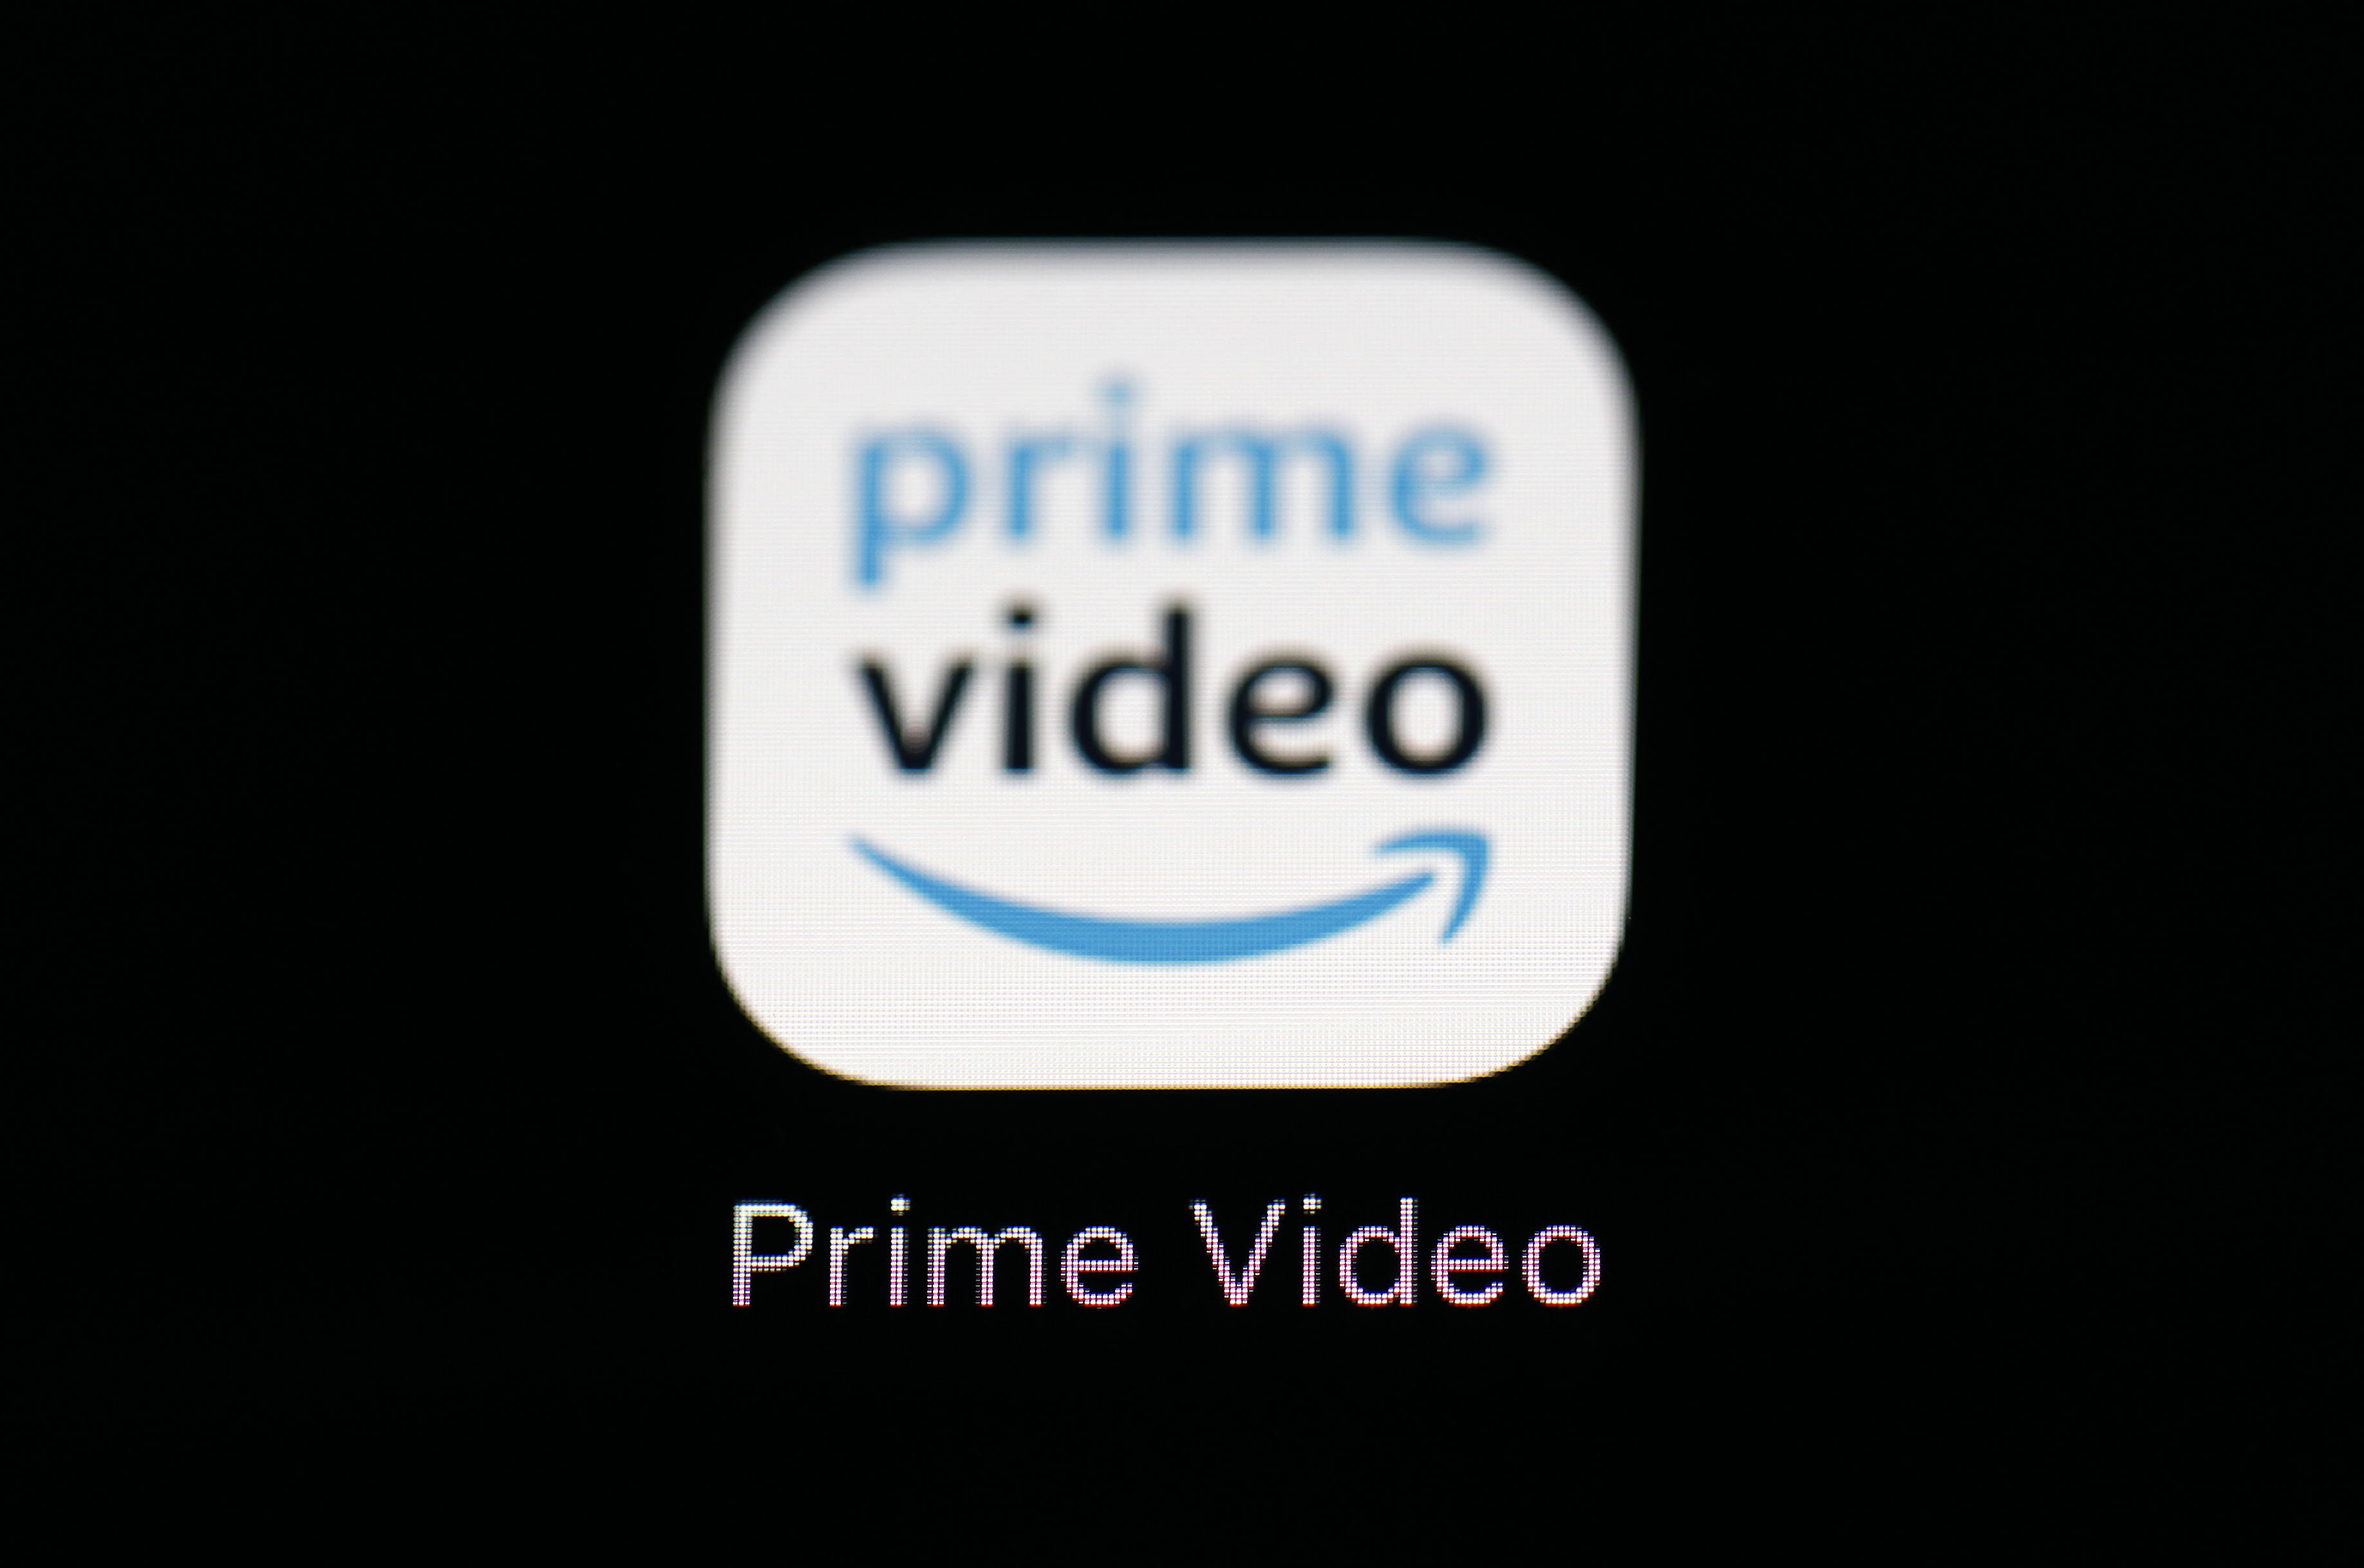 Prime Video will soon come with ads. Here's the cost to avoid them